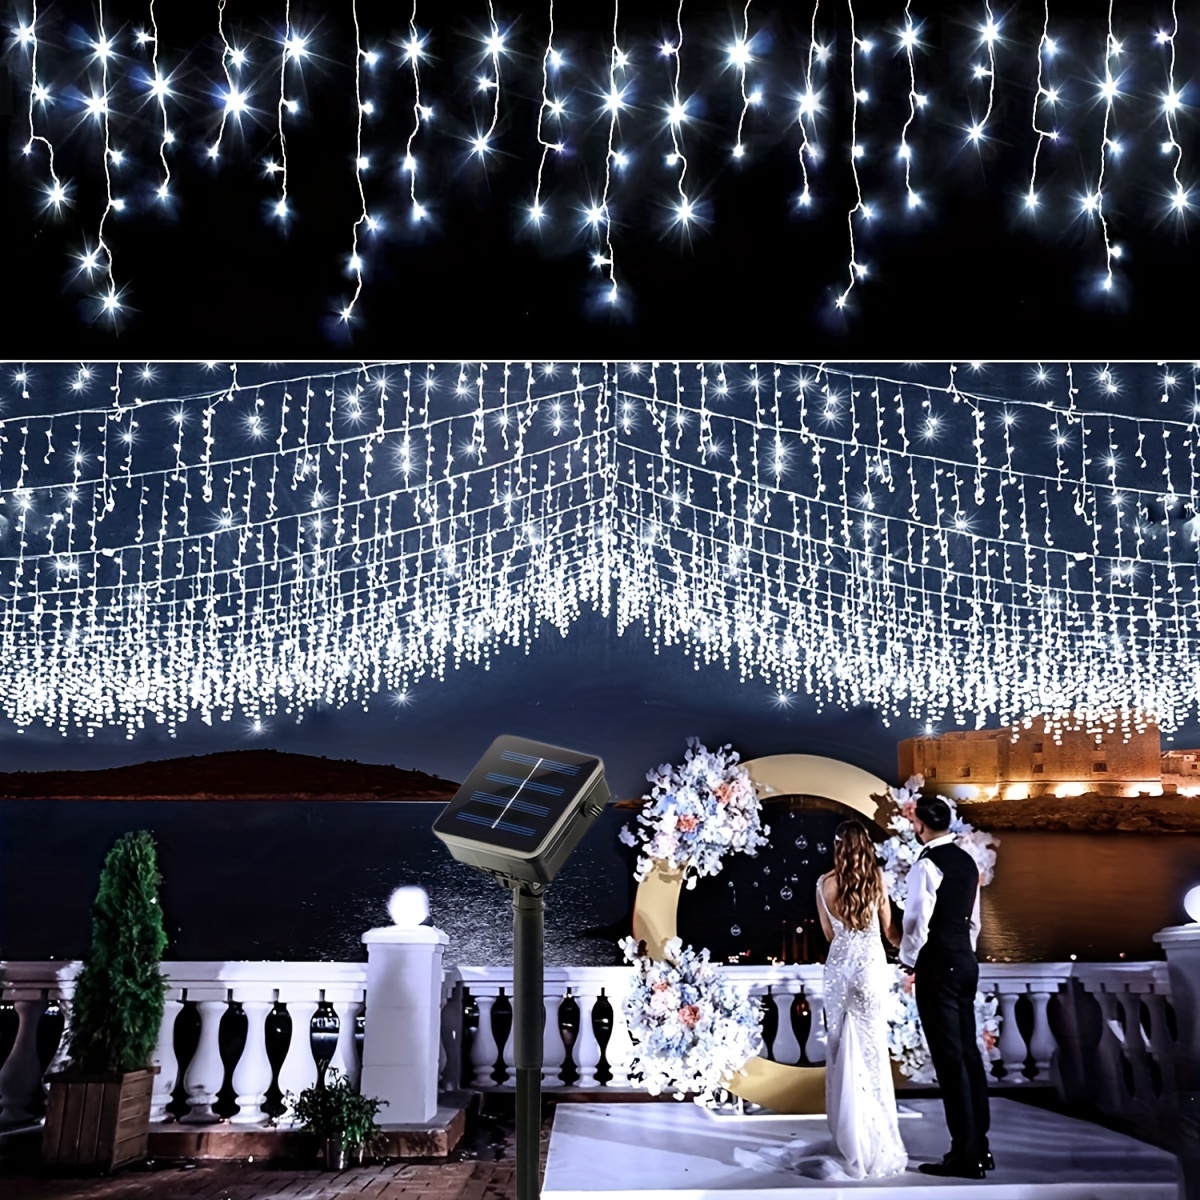 1pc icicle lights outdoor solar curtain lights 4m 13ft 96led 8 modes icicle christmas lights with 16 drops yard light icicle string lights waterproof lights for indoor patio tree house decor christmas halloween decorations details 1